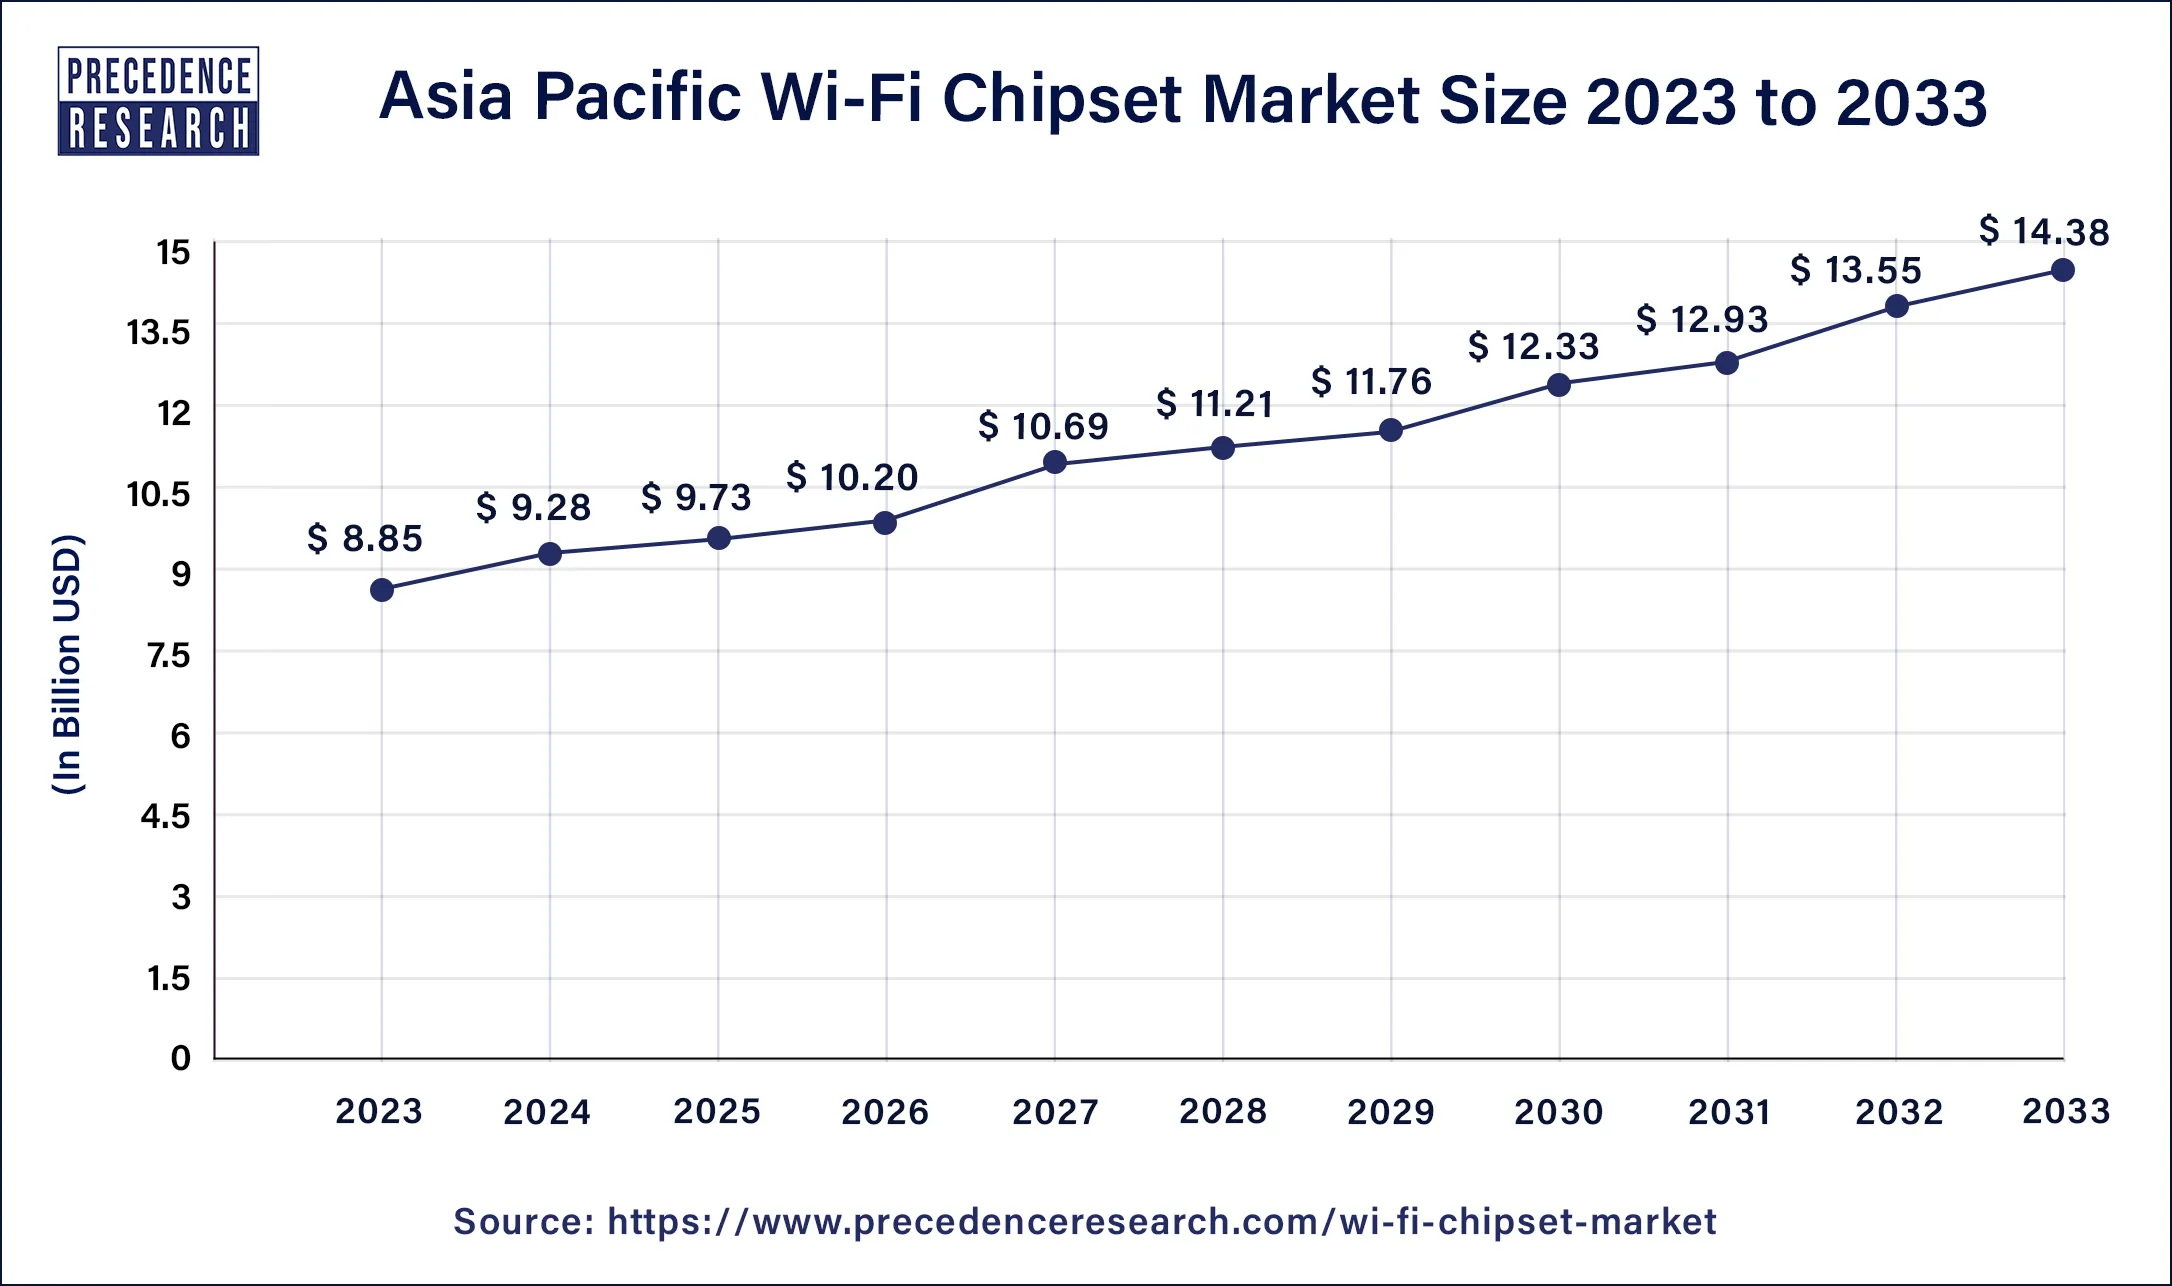 Asia Pacific Wi-Fi Chipset Market Size 2024 to 2033